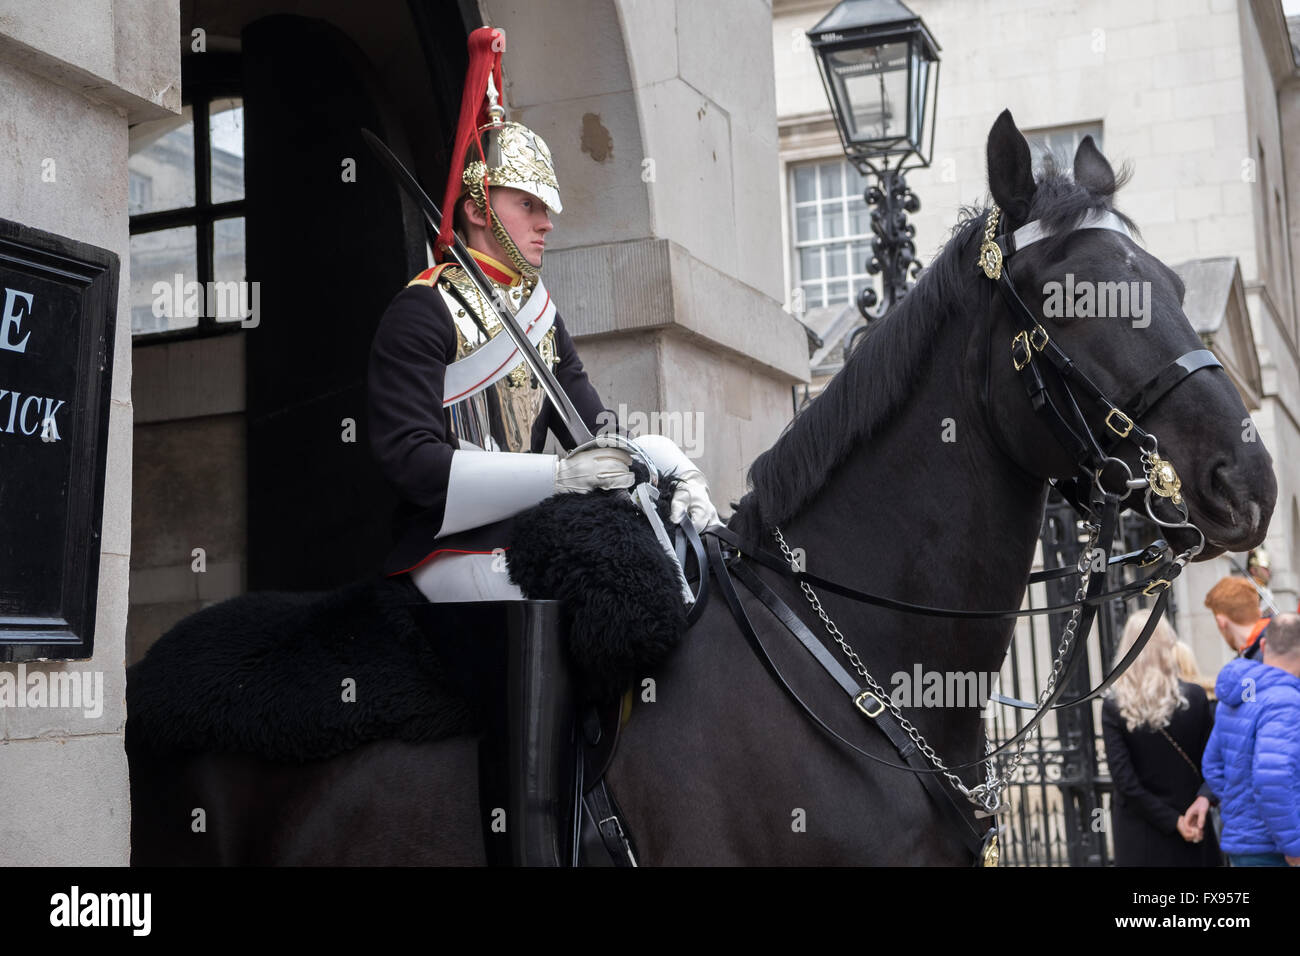 British soldier of the Blues and Royals regiment mounted on horseback Stock Photo